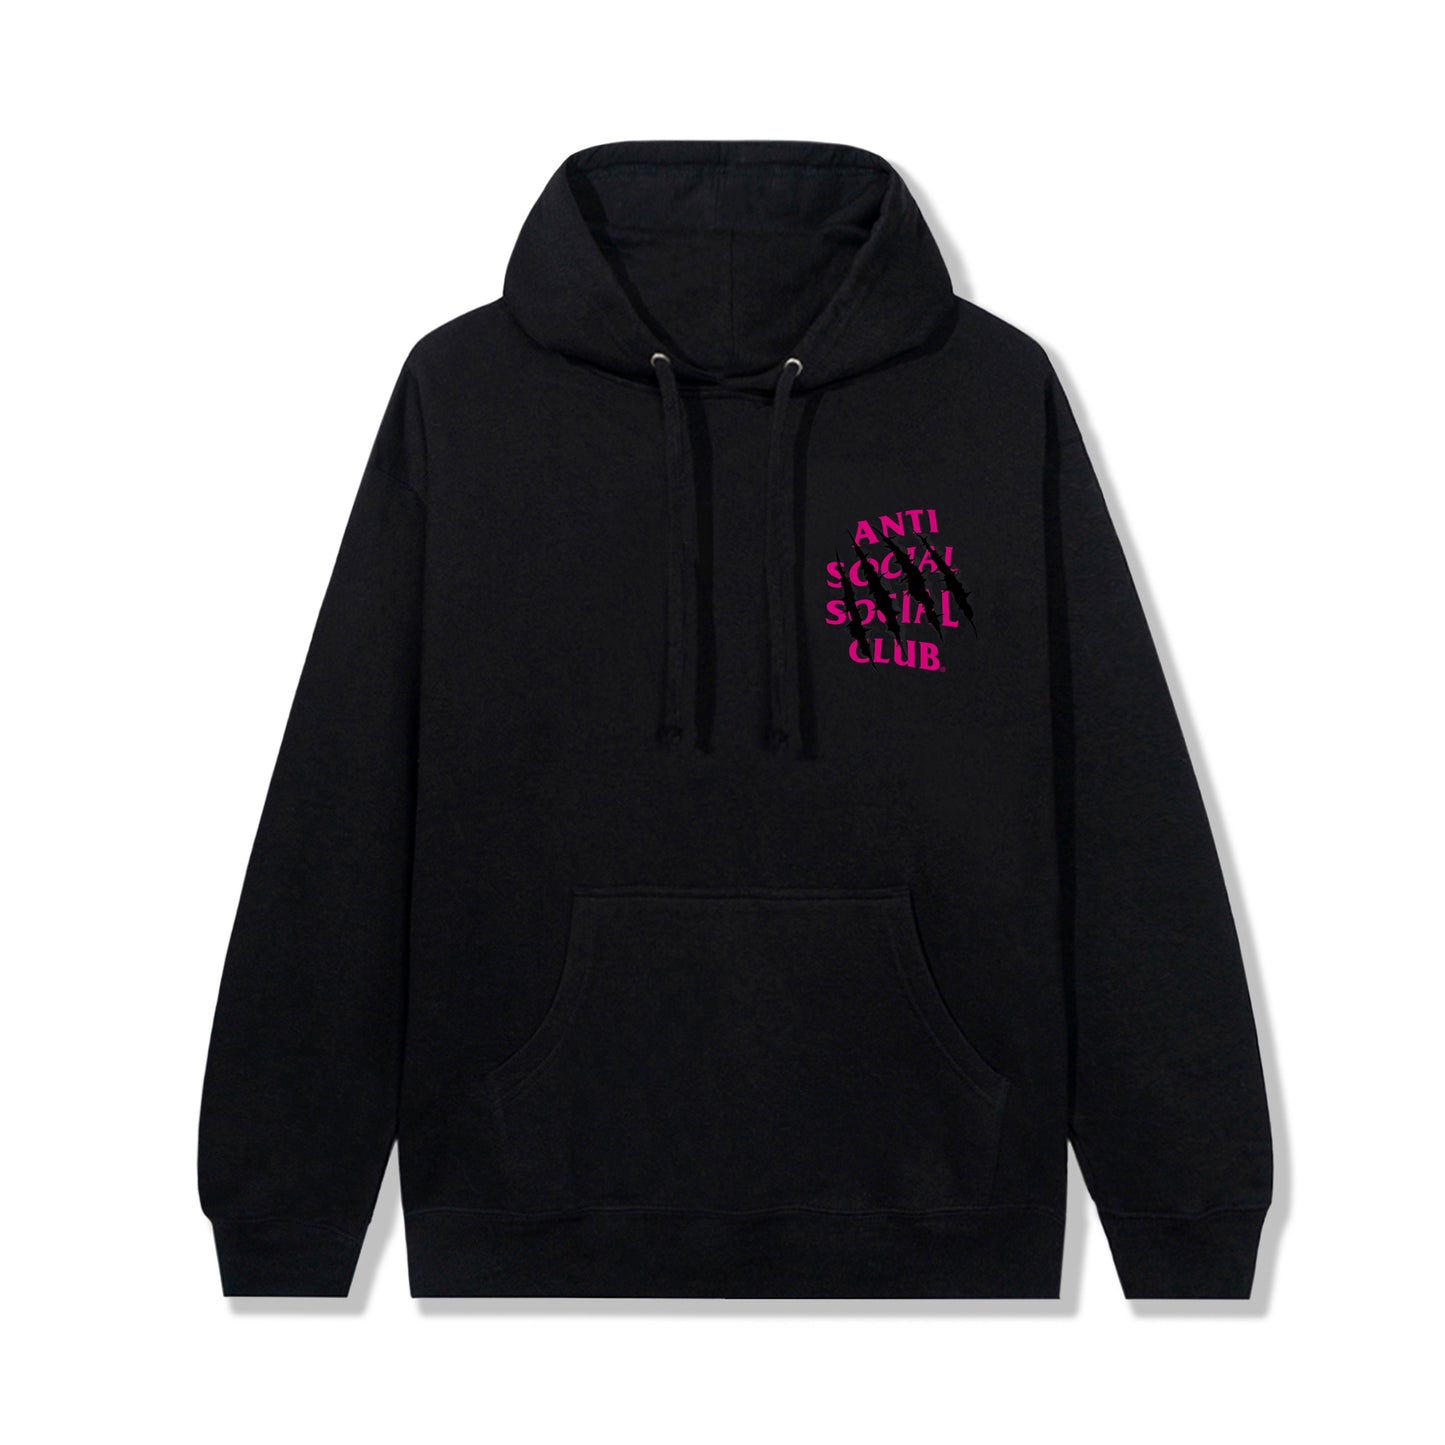 After Us Black Hoodie – AntiSocialSocialClub